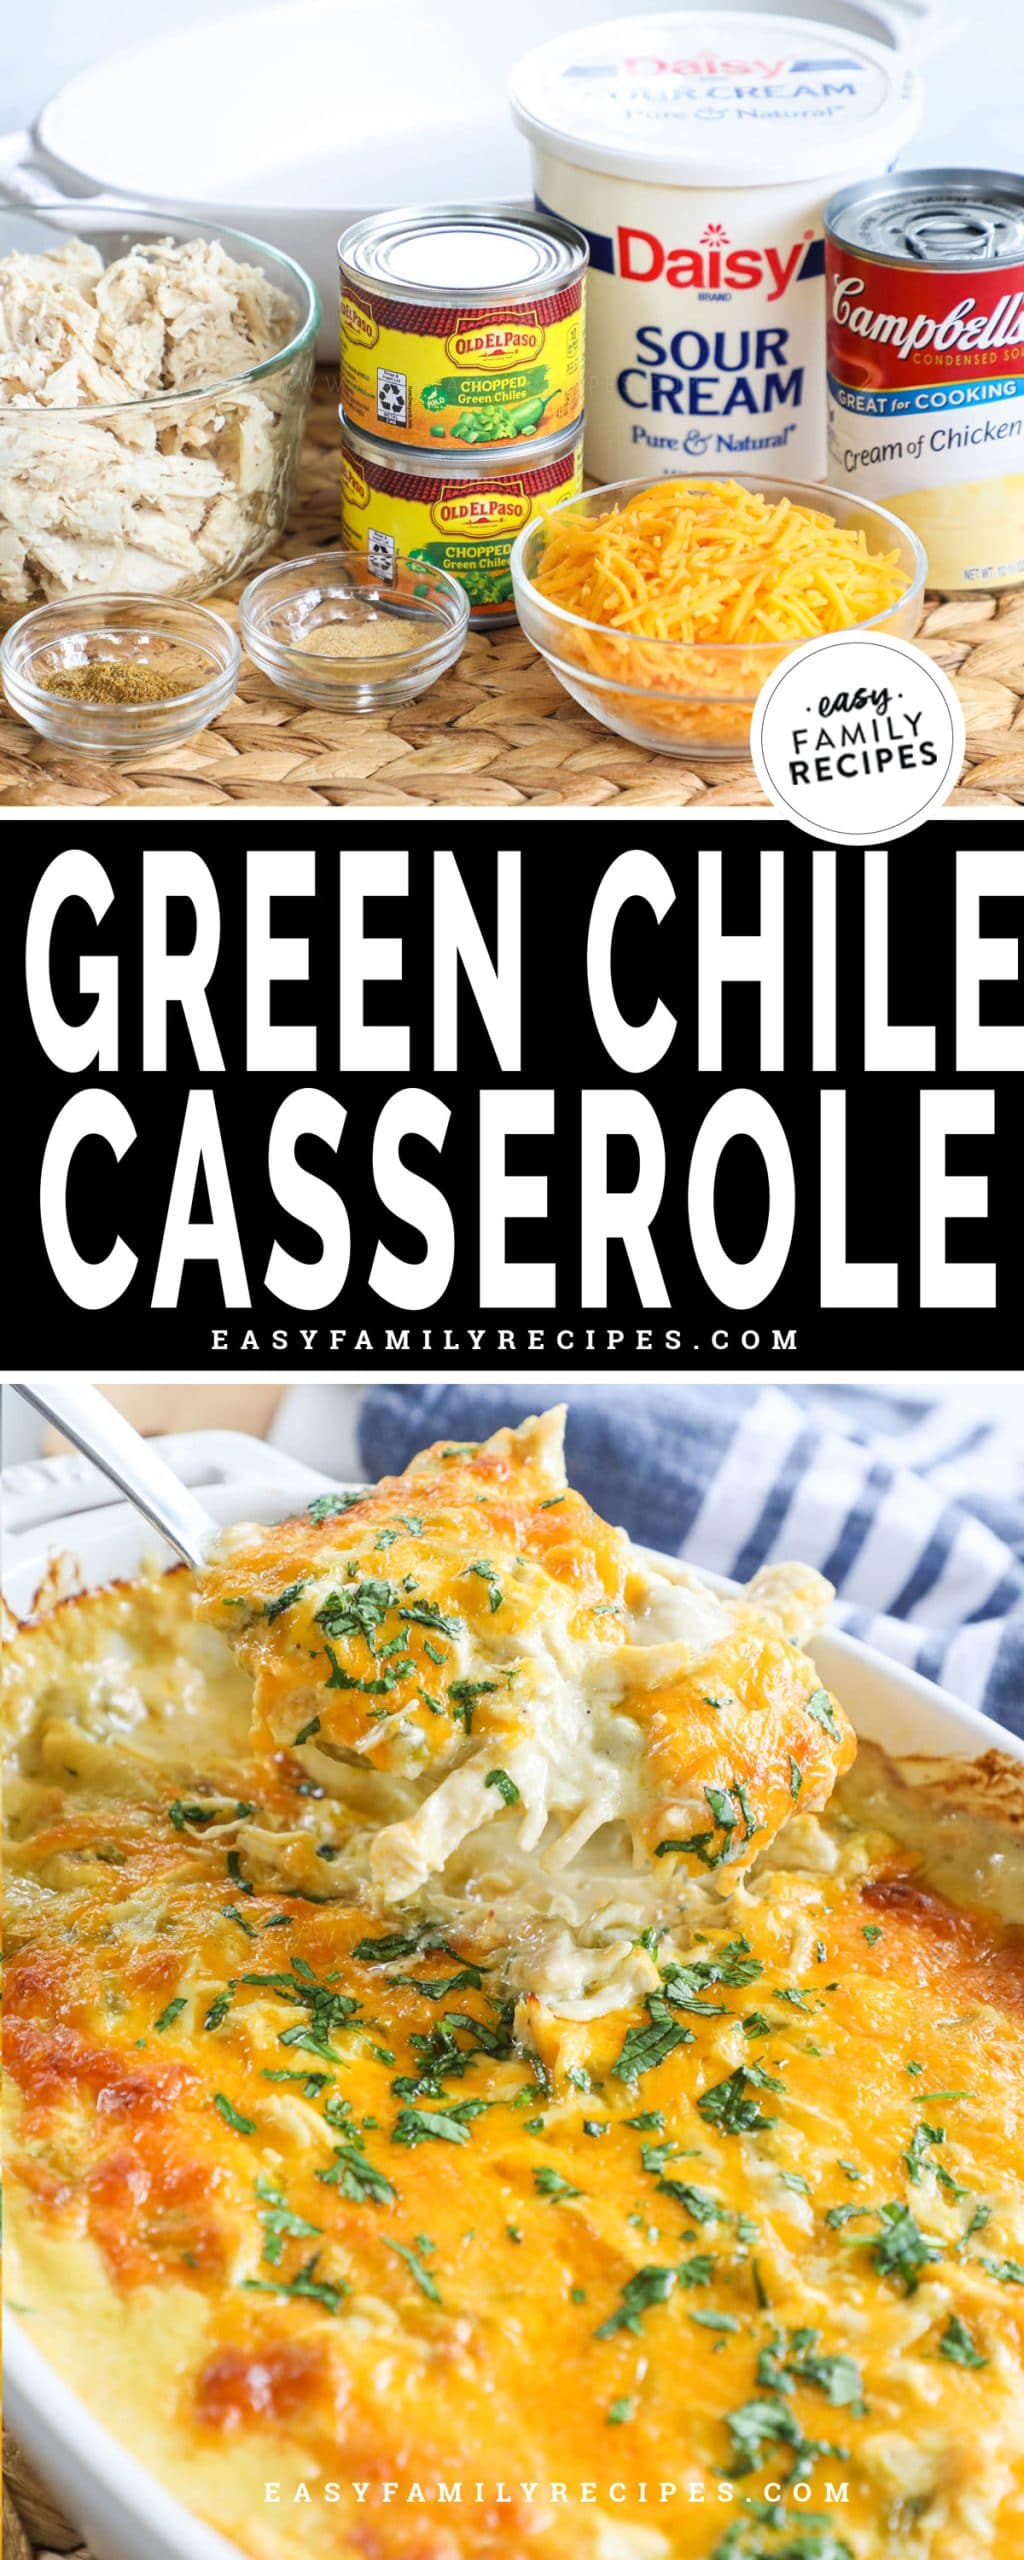 Scooping Creamy Green Chile Chicken Casserole to serve on rice